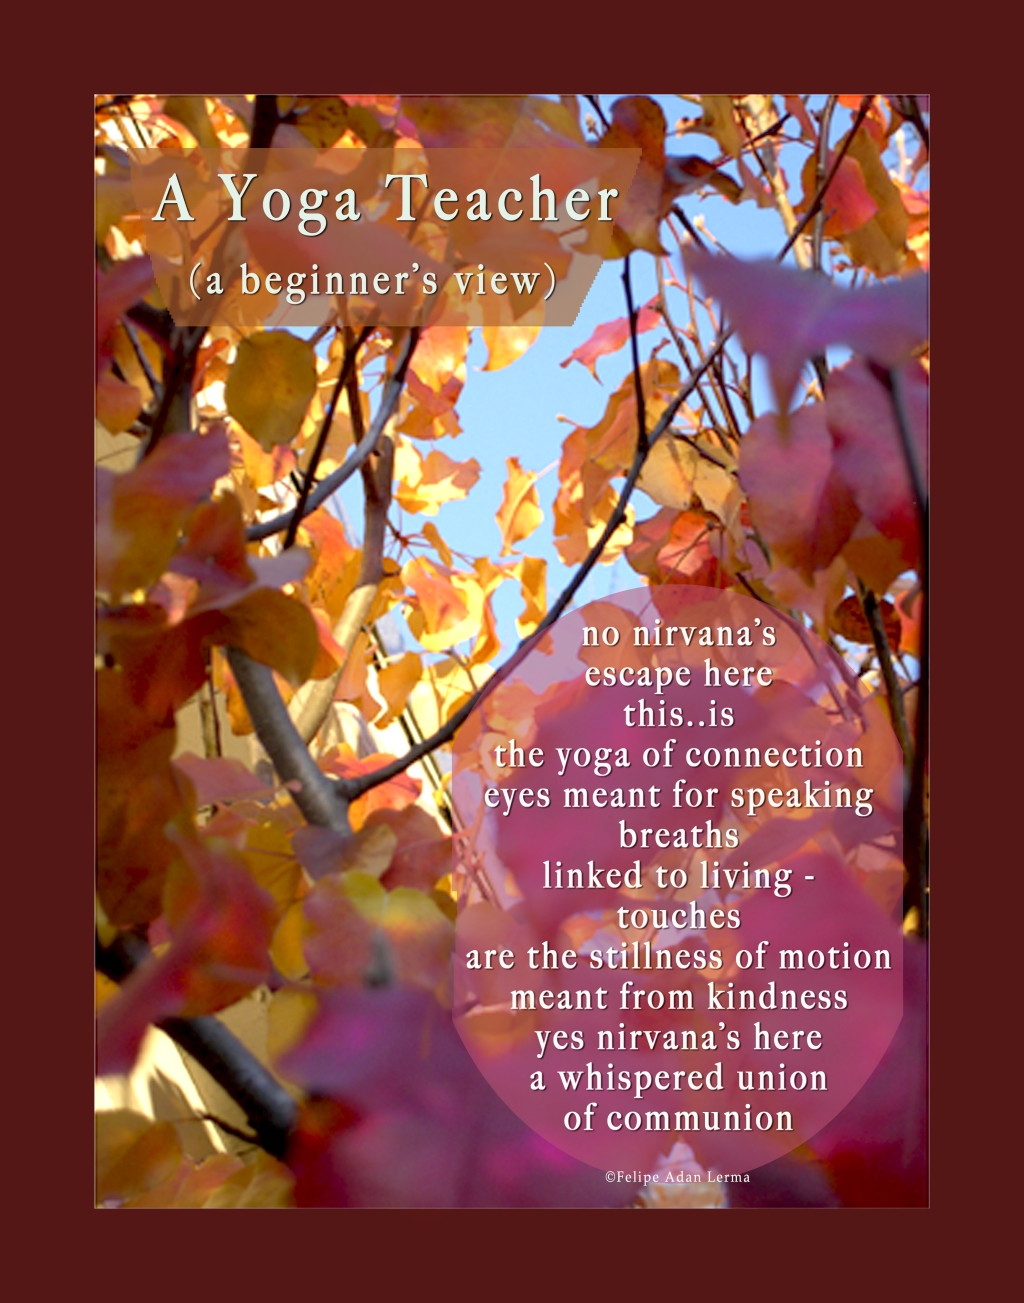 March 06, 2021 – A Yoga Teacher – Gift Writing / Poetry by Adan